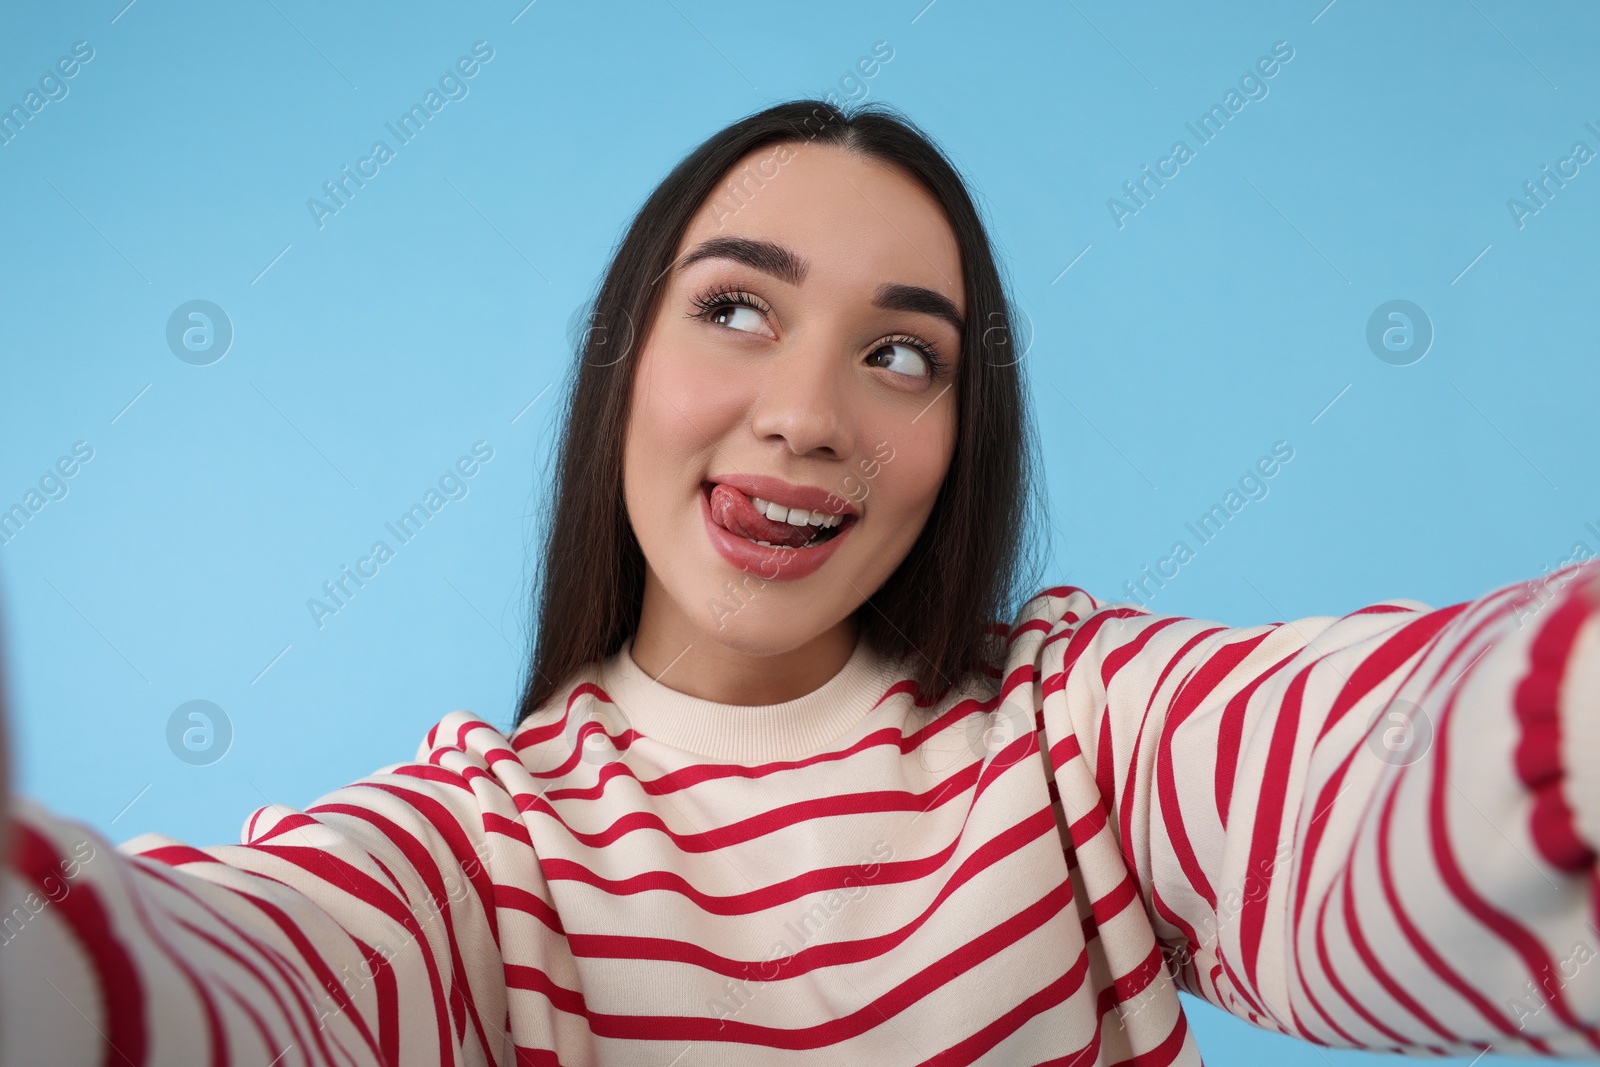 Photo of Young woman taking selfie on light blue background